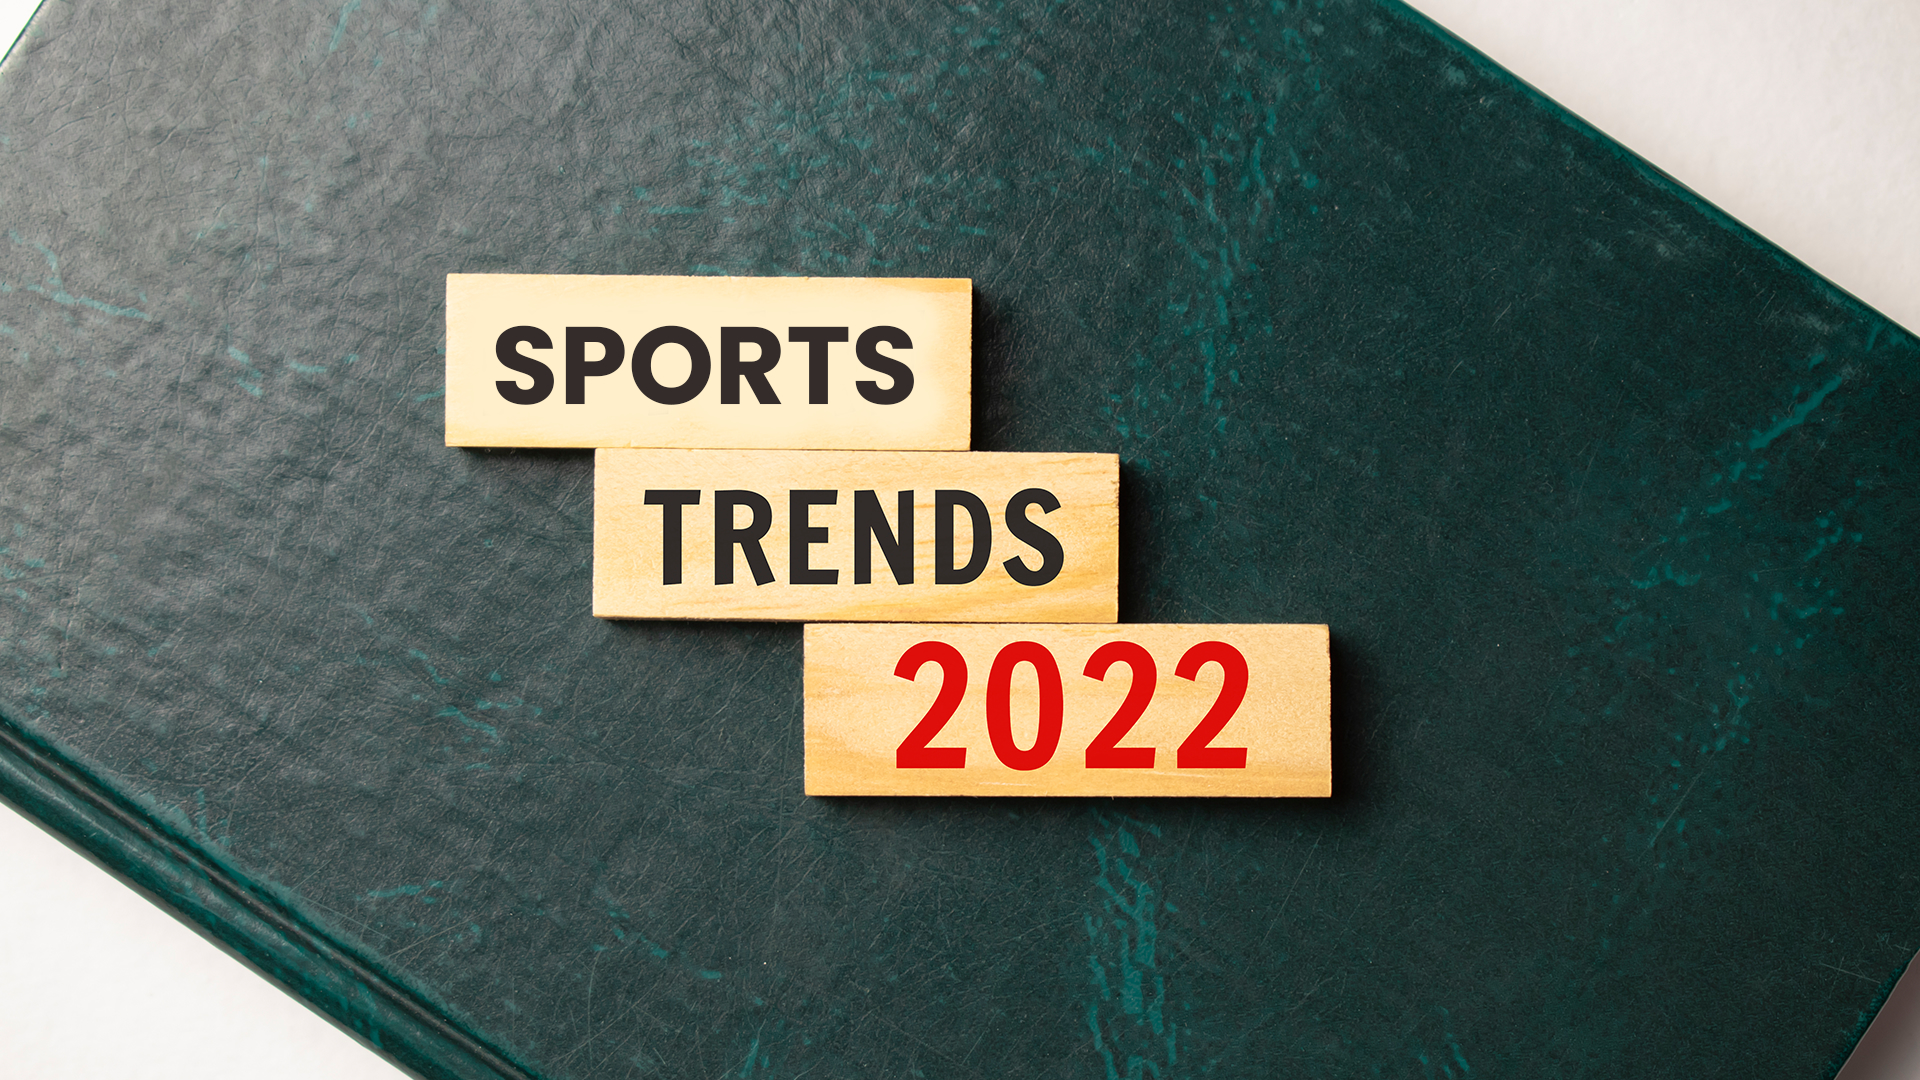 Sports Industry Trends, sports world